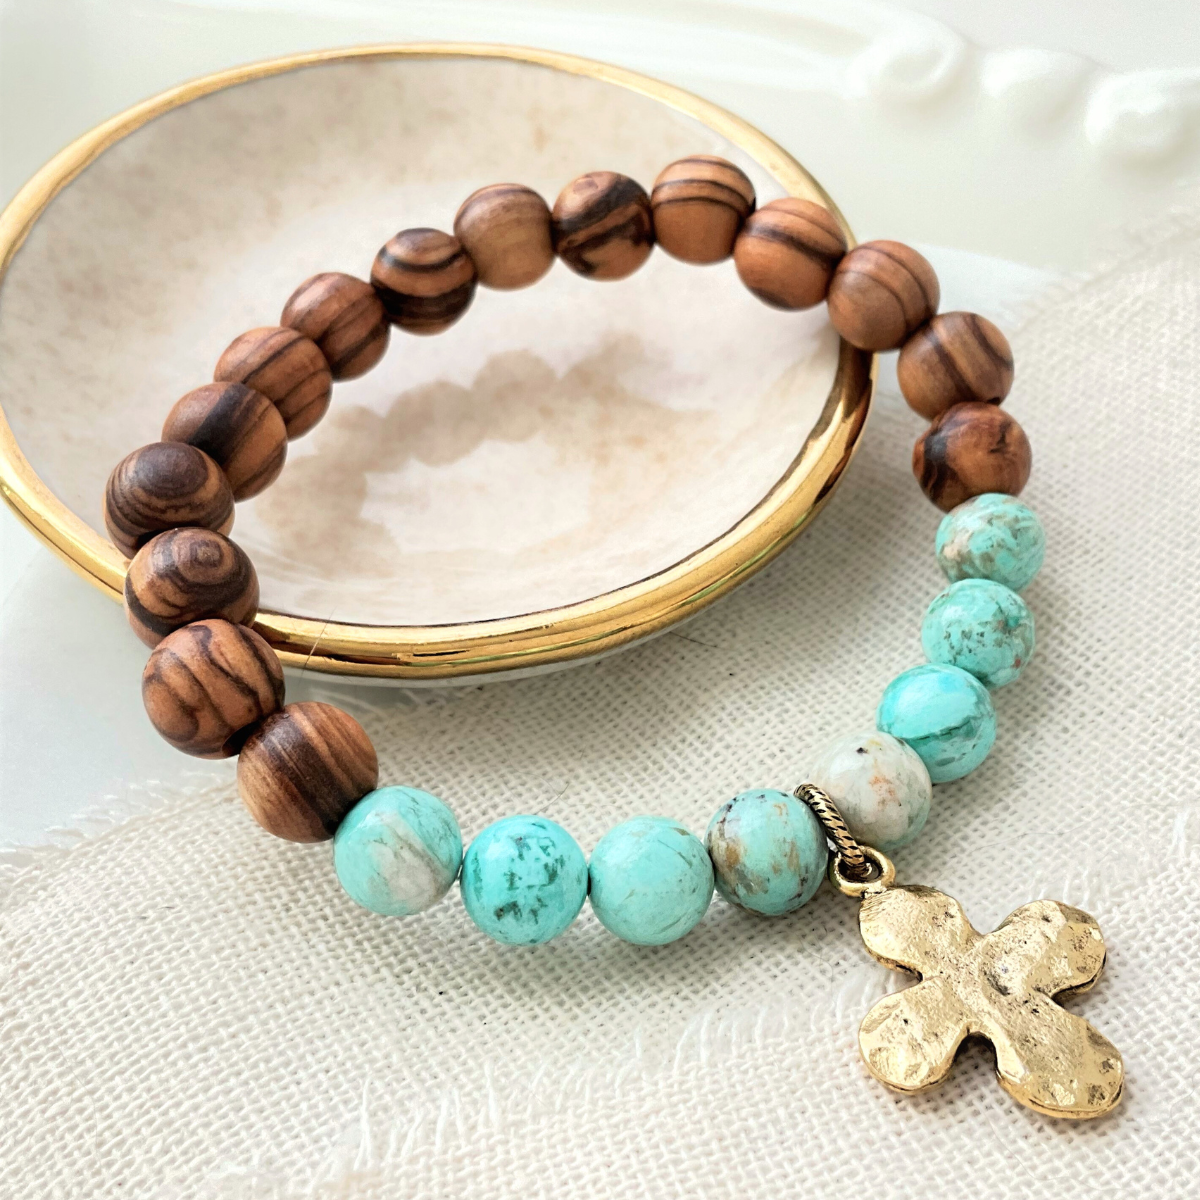 Inspire Me Bracelets - Daddy's Little Girl-Inspirational Bead Bracelet Turquoise ite / Kids Small - (Ages 5-9yrs Old)